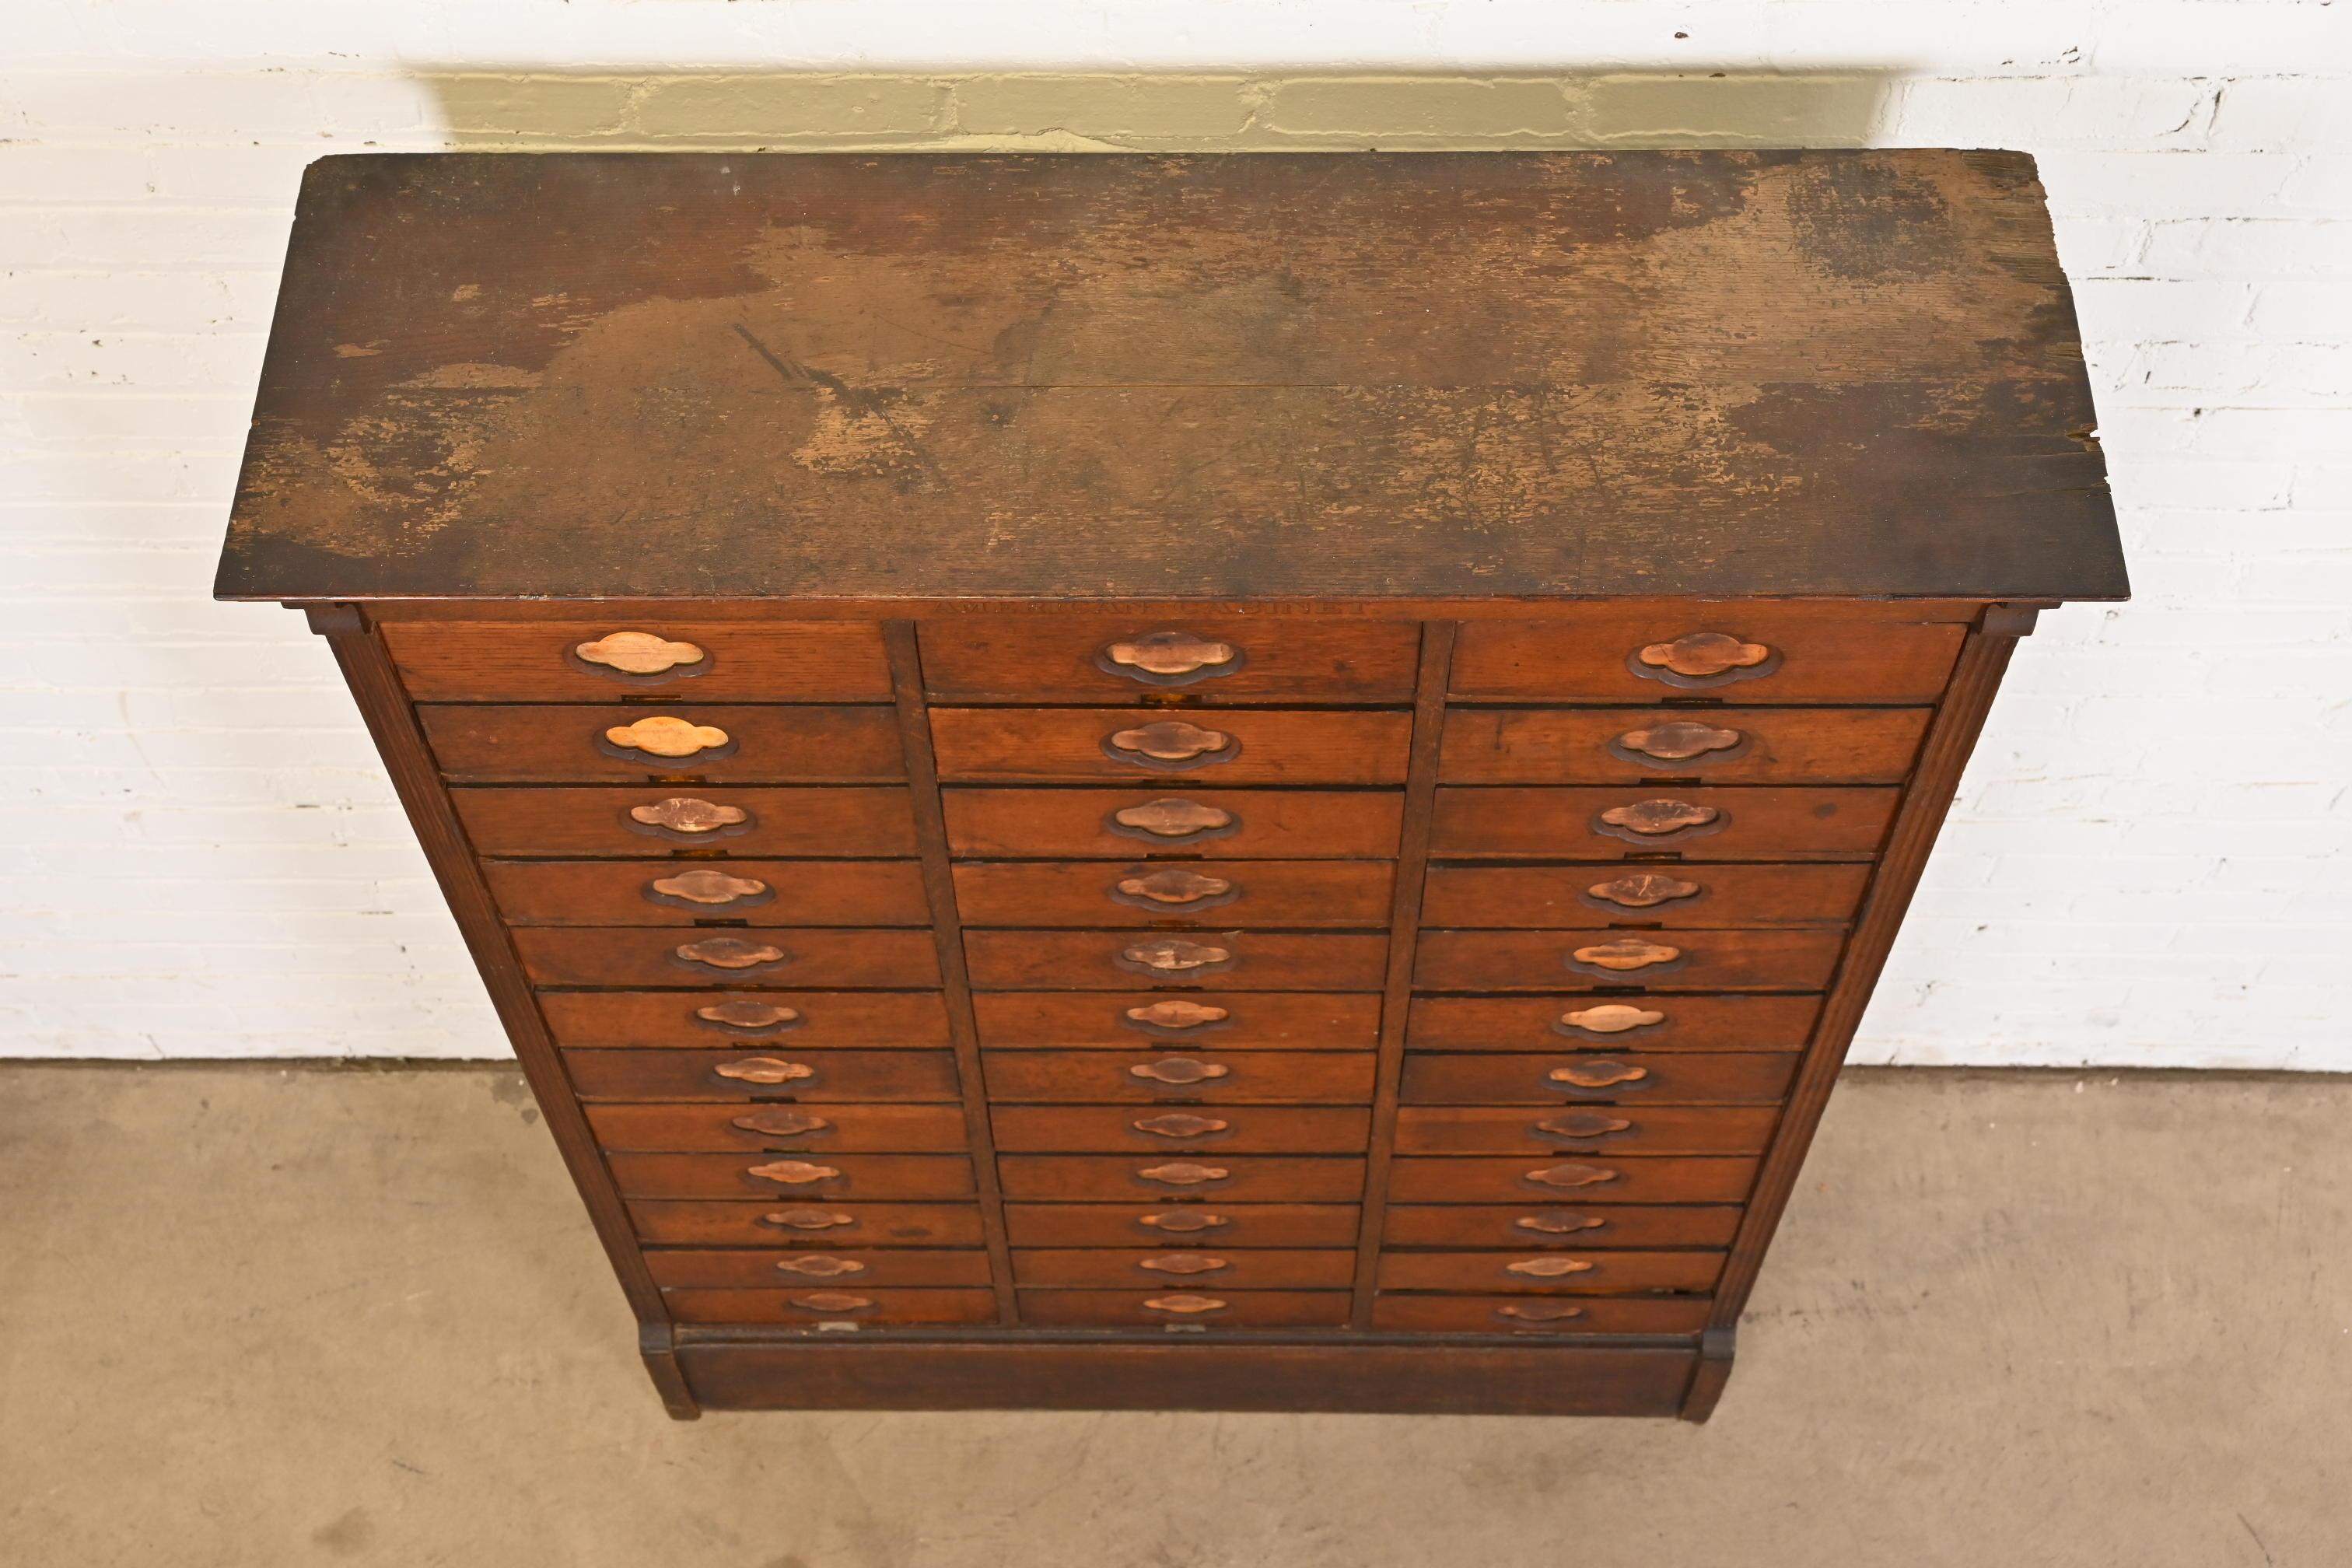 Antique Arts & Crafts 36-Drawer File Cabinet by American Cabinet Co., Circa 1900 For Sale 5